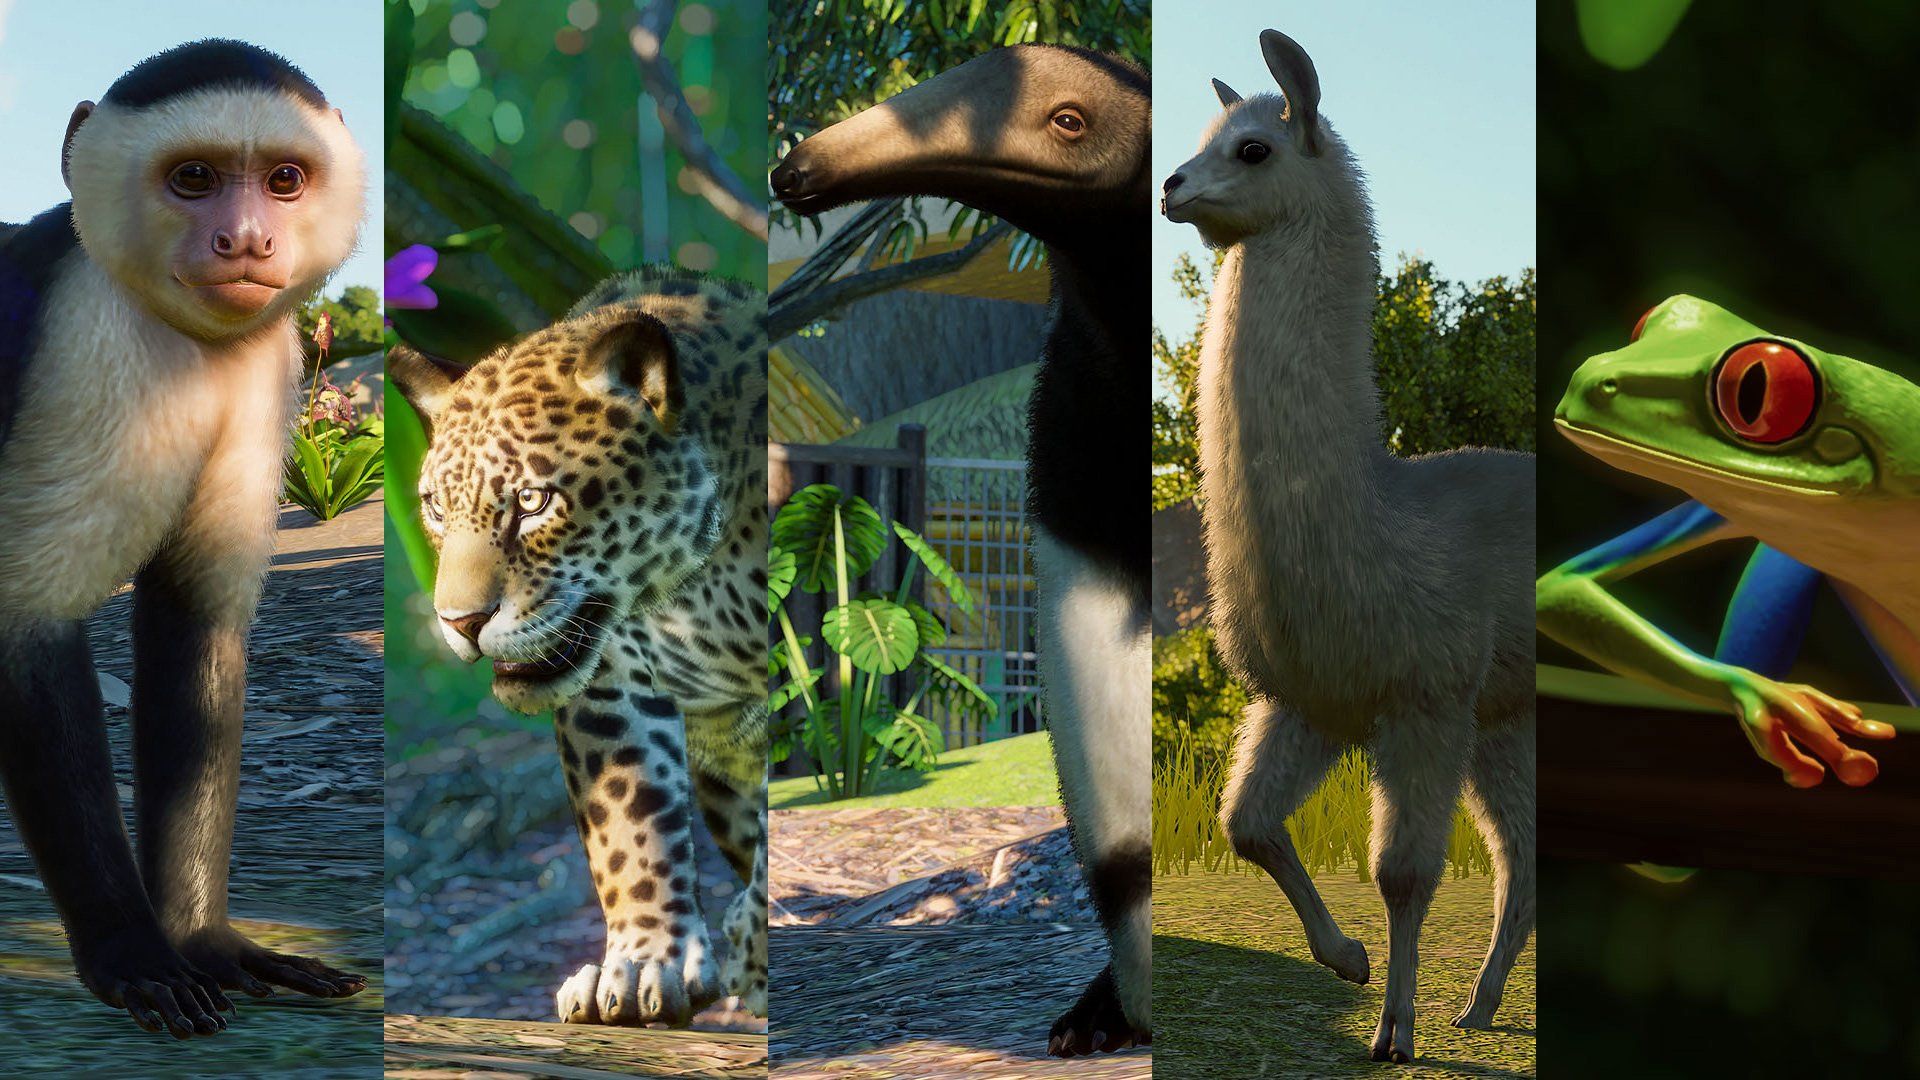 Planet Zoo's South America Pack adds a few fan favorites